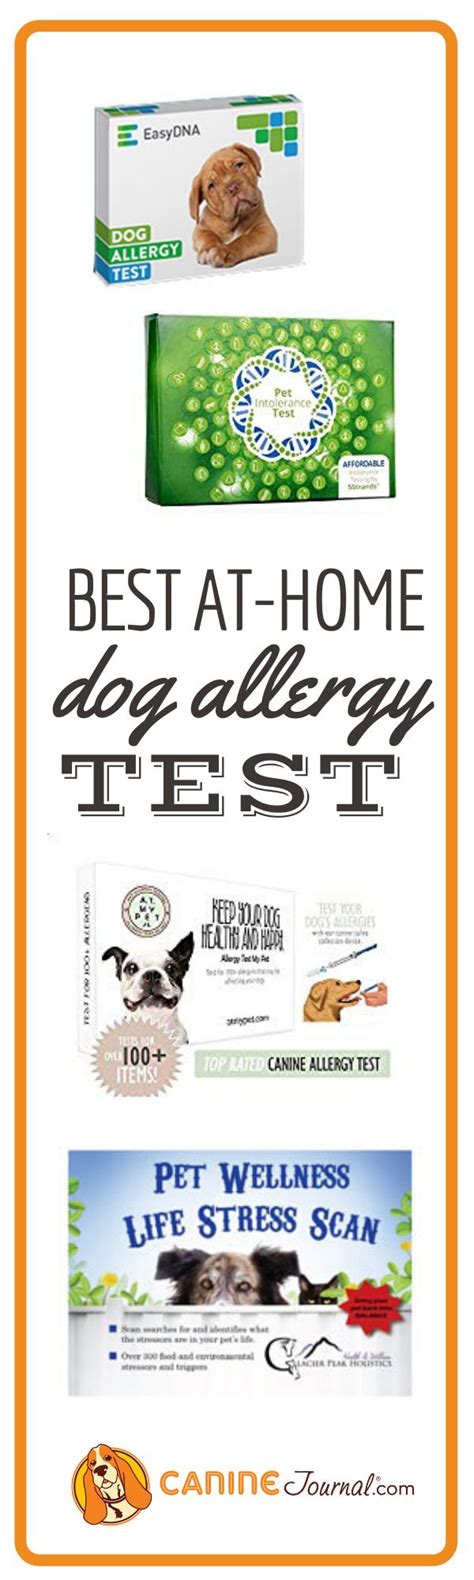 Best At Home Dog Allergy Test Kits For Food Sensitivities And More